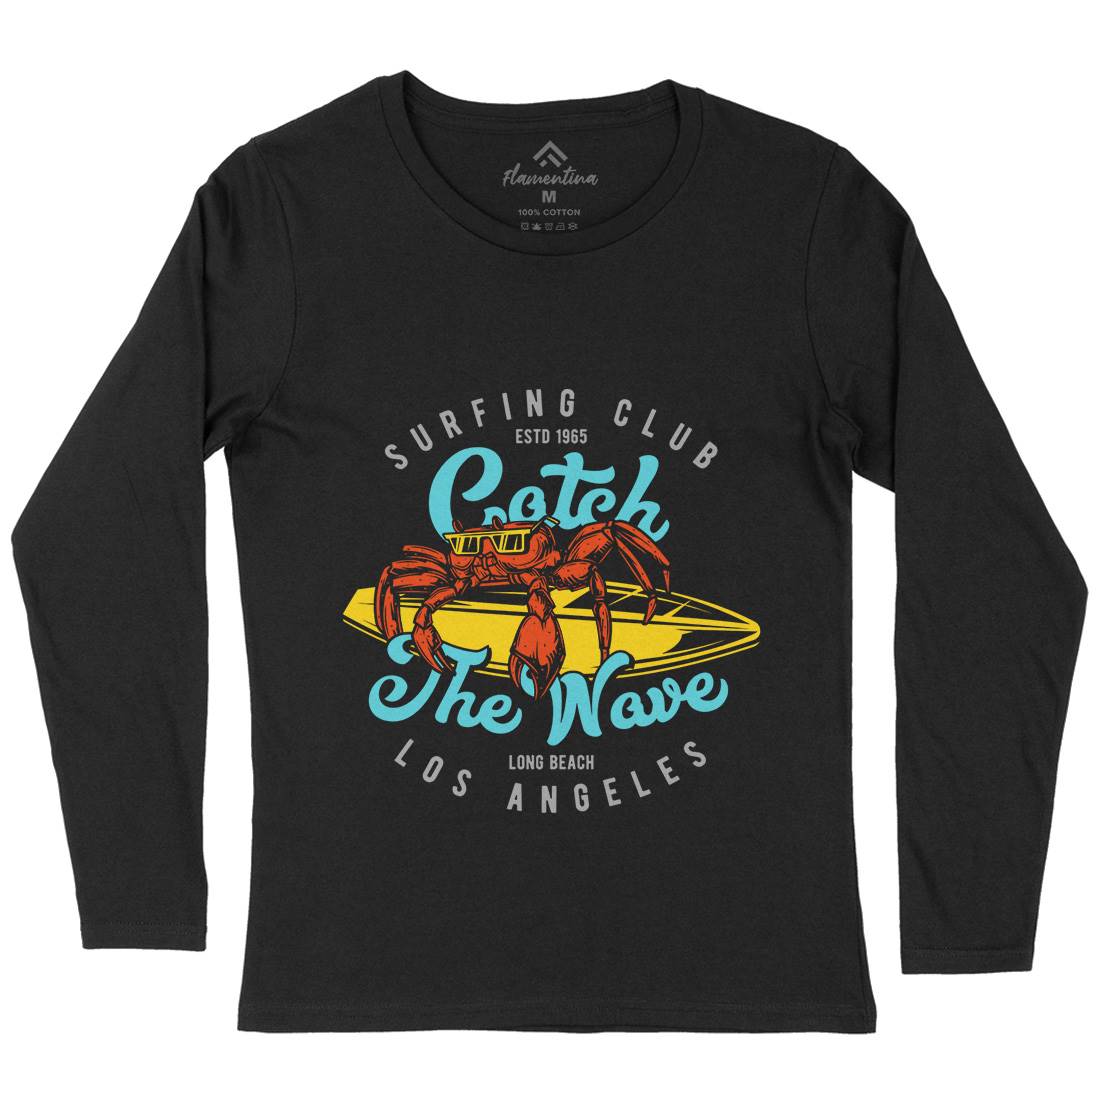 Catch The Wave Surfing Womens Long Sleeve T-Shirt Surf B877